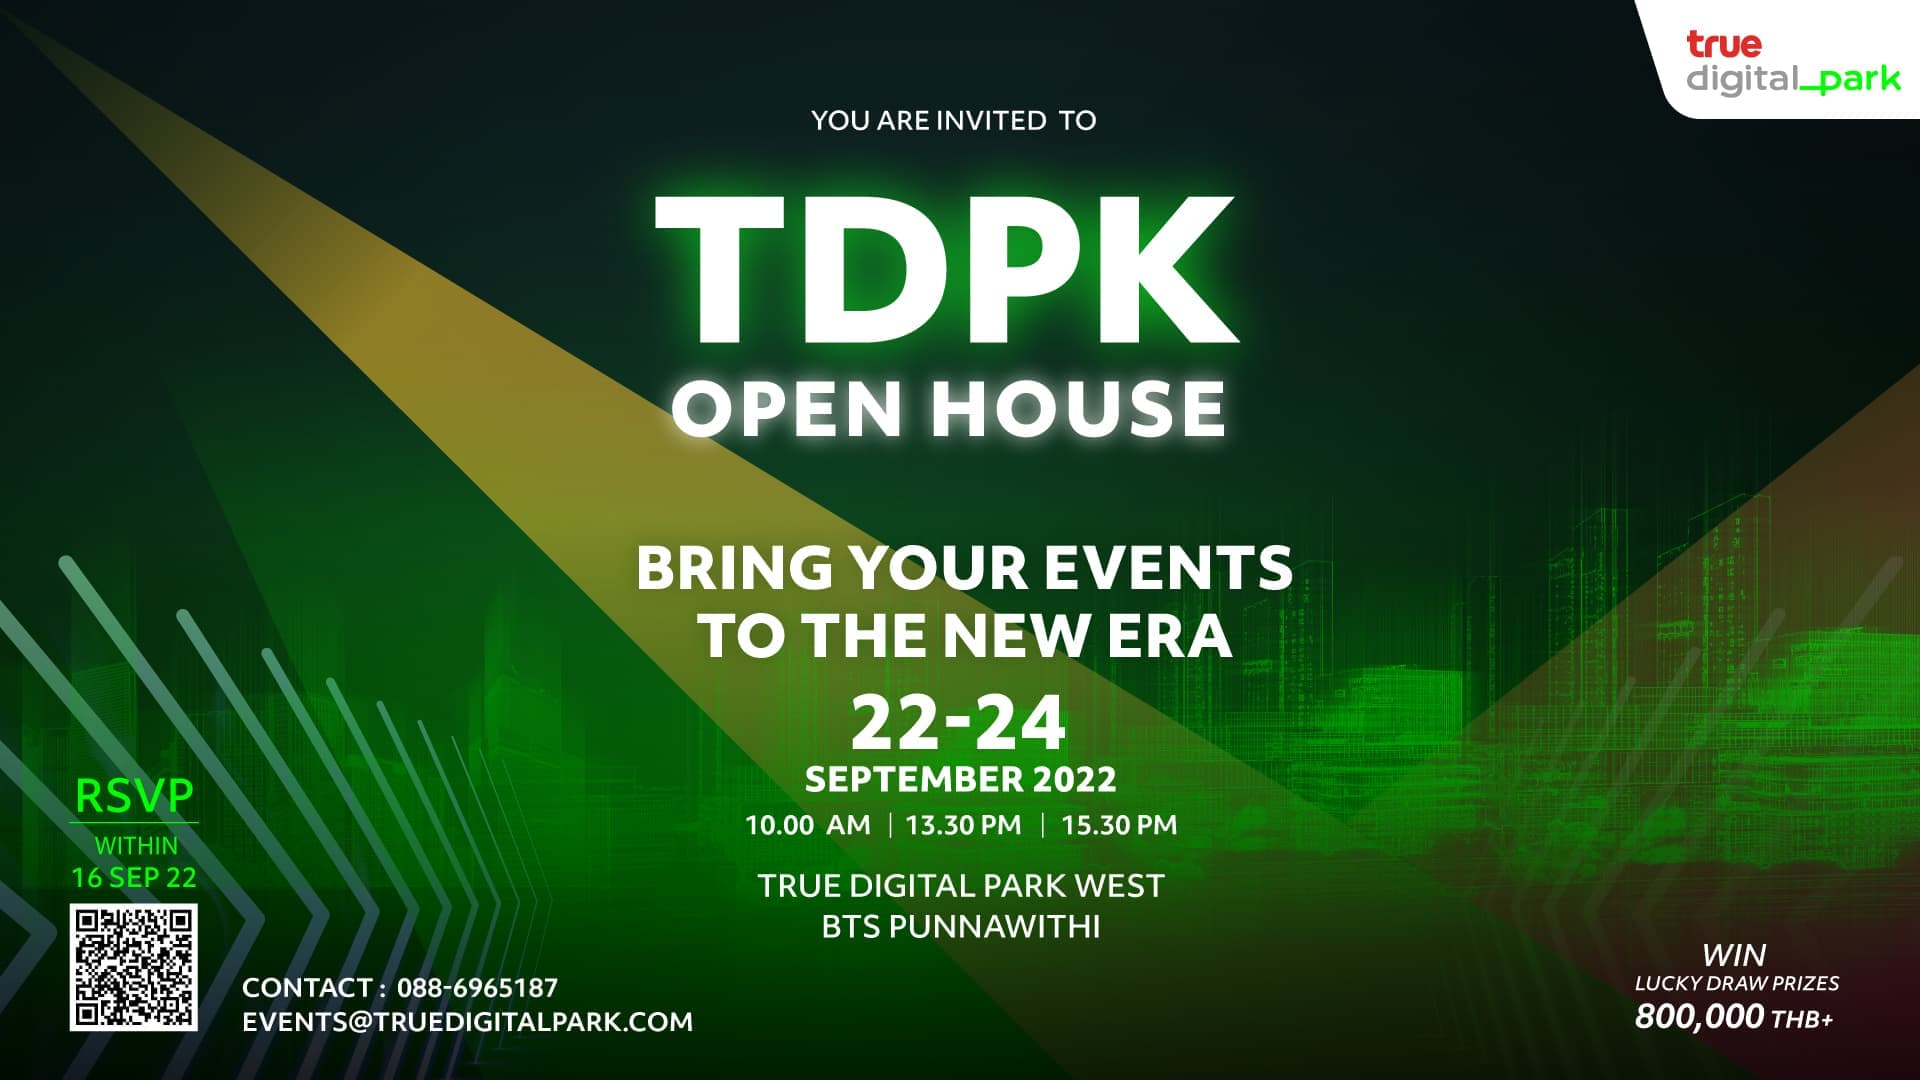 Experience new event spaces at TDPK OPEN HOUSE